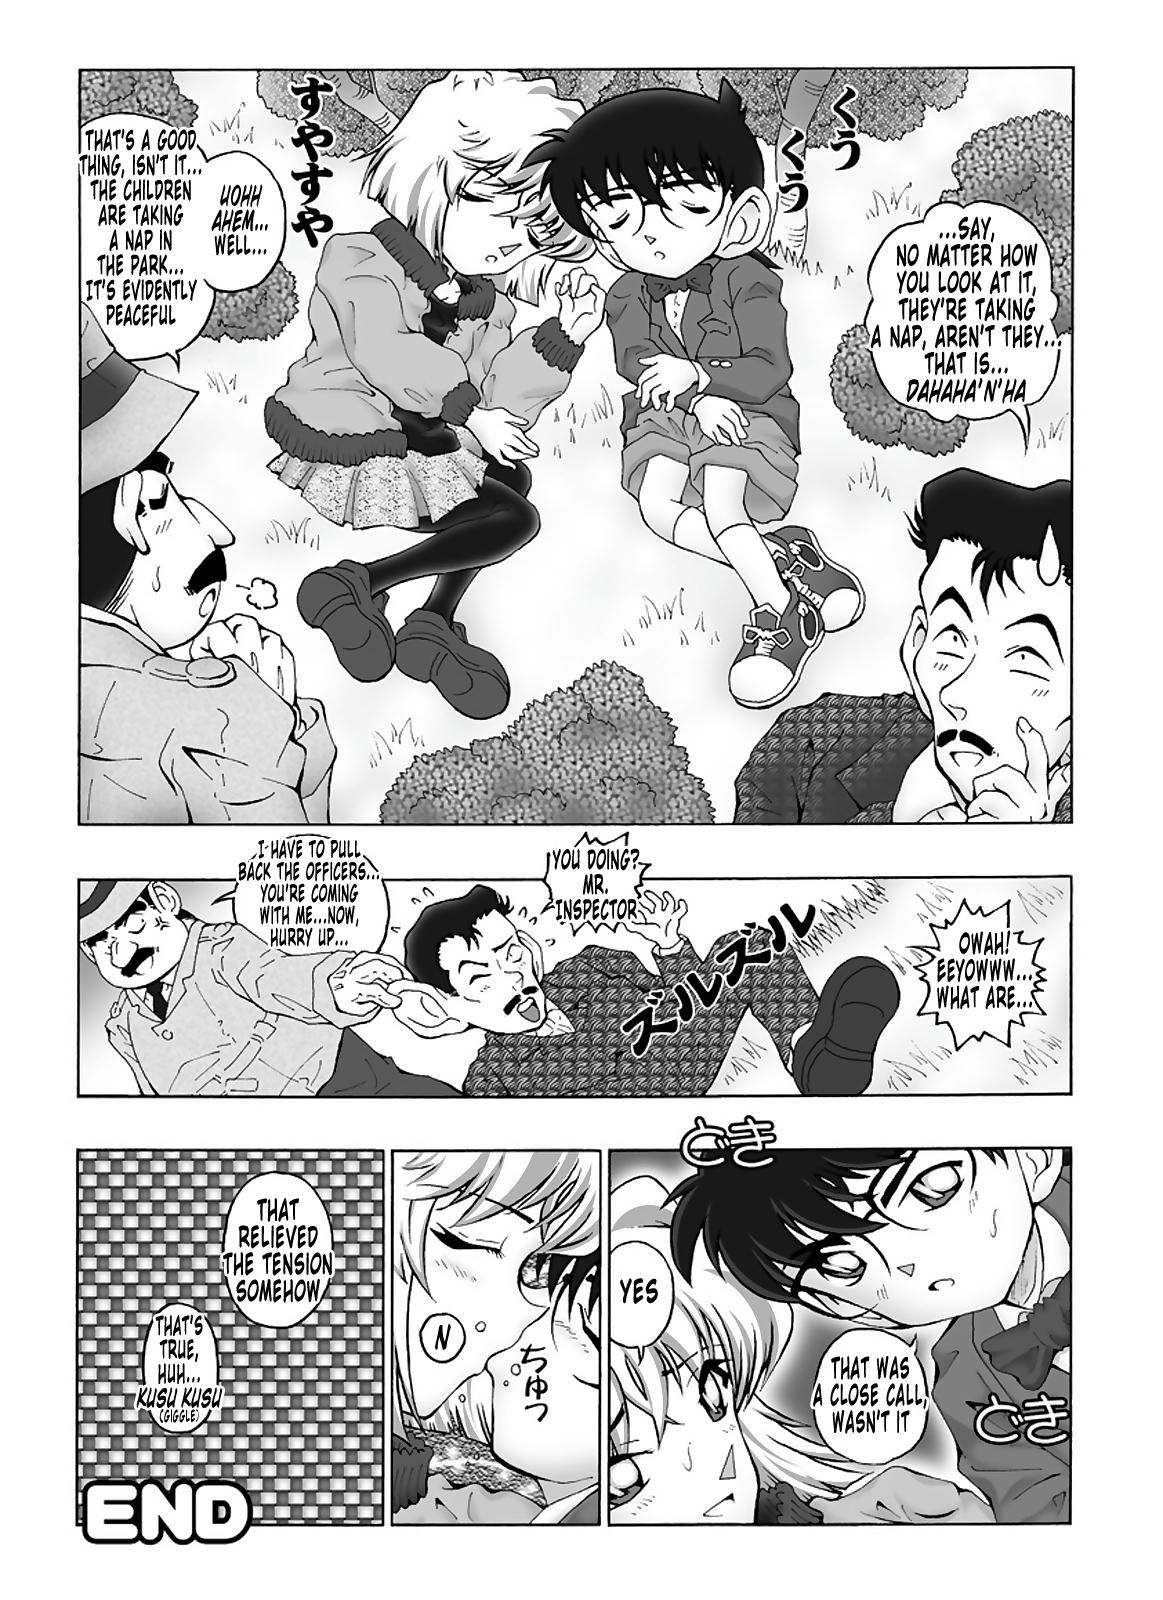 Bumbling Detective Conan - File 5: The Case of The Confrontation with The Black Organiztion 18